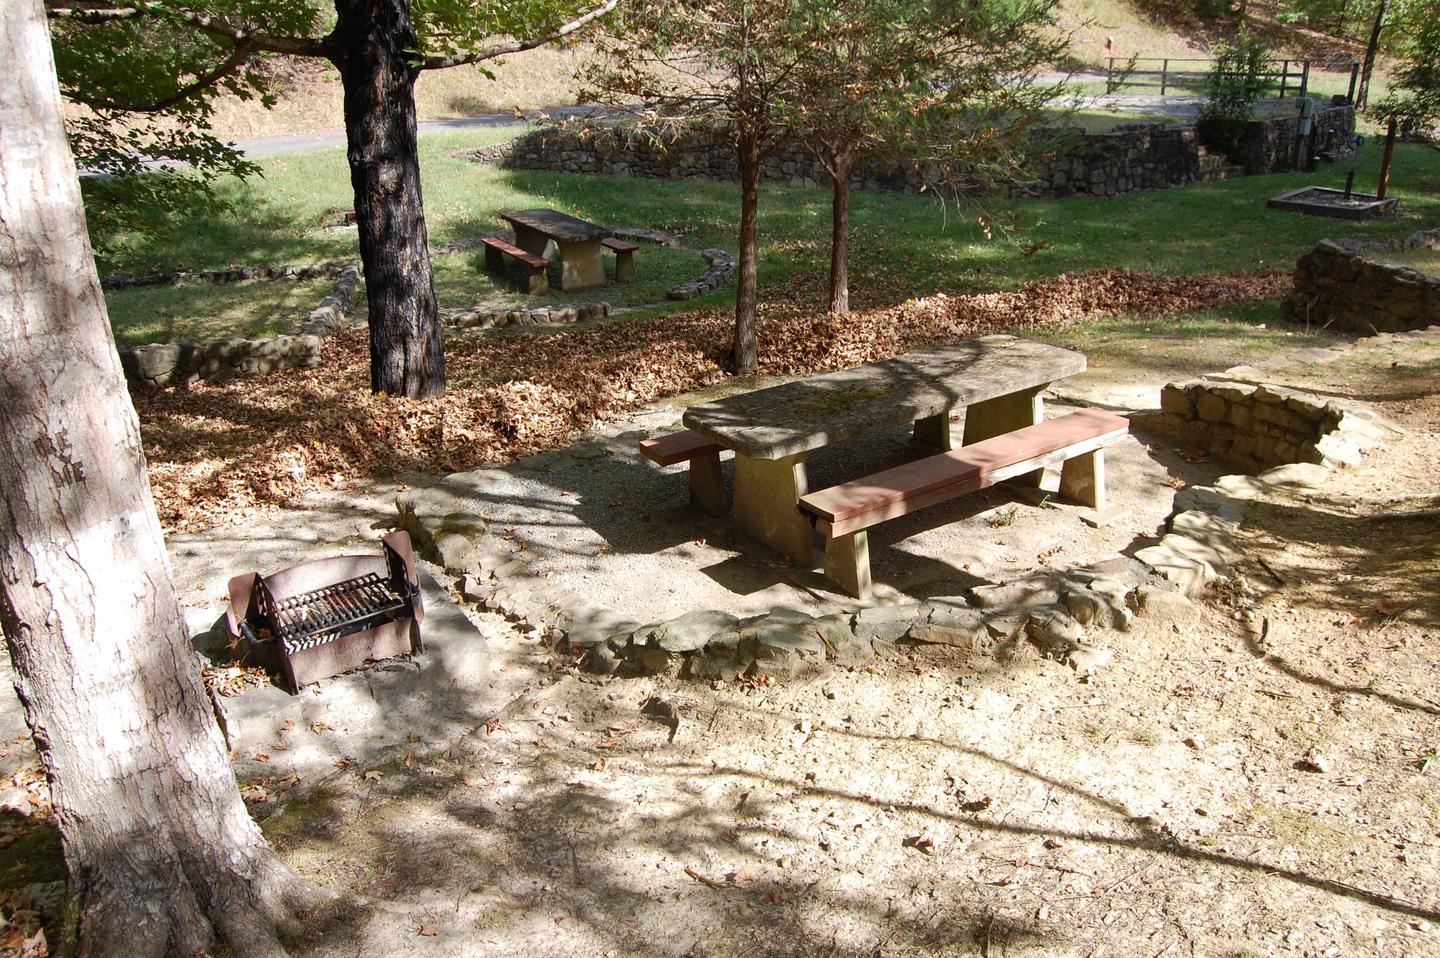 16 picnicSite sits in interior of camping loop, below parking area and is accessible with stairs. It has an open setting and is close to site 17, making both sites together ideal for a larger group. 